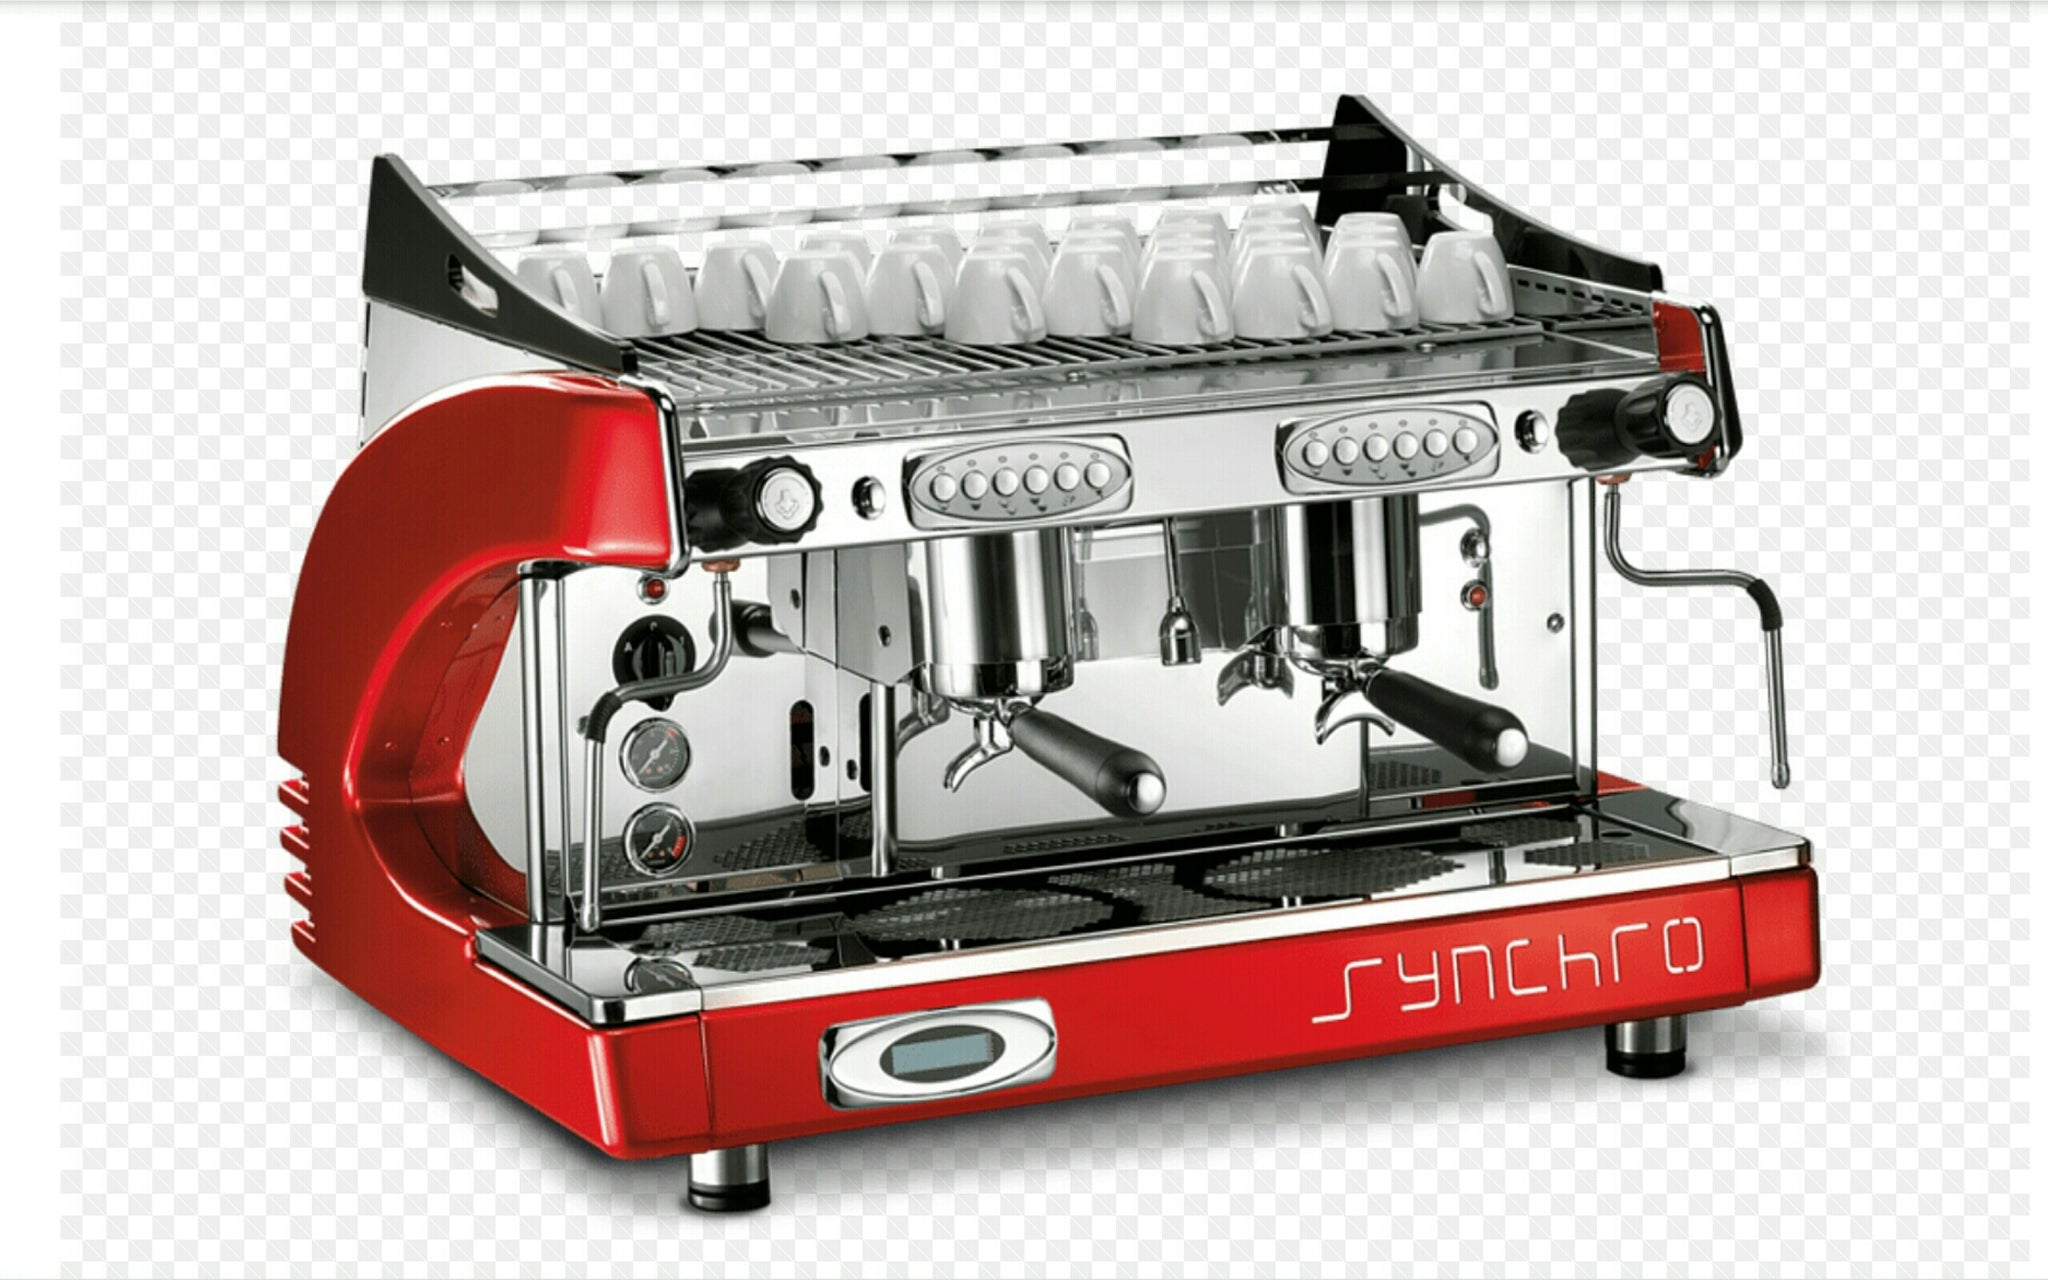 We Have The Full Line of espresso Coffee Machine 1/2/3/4 Group